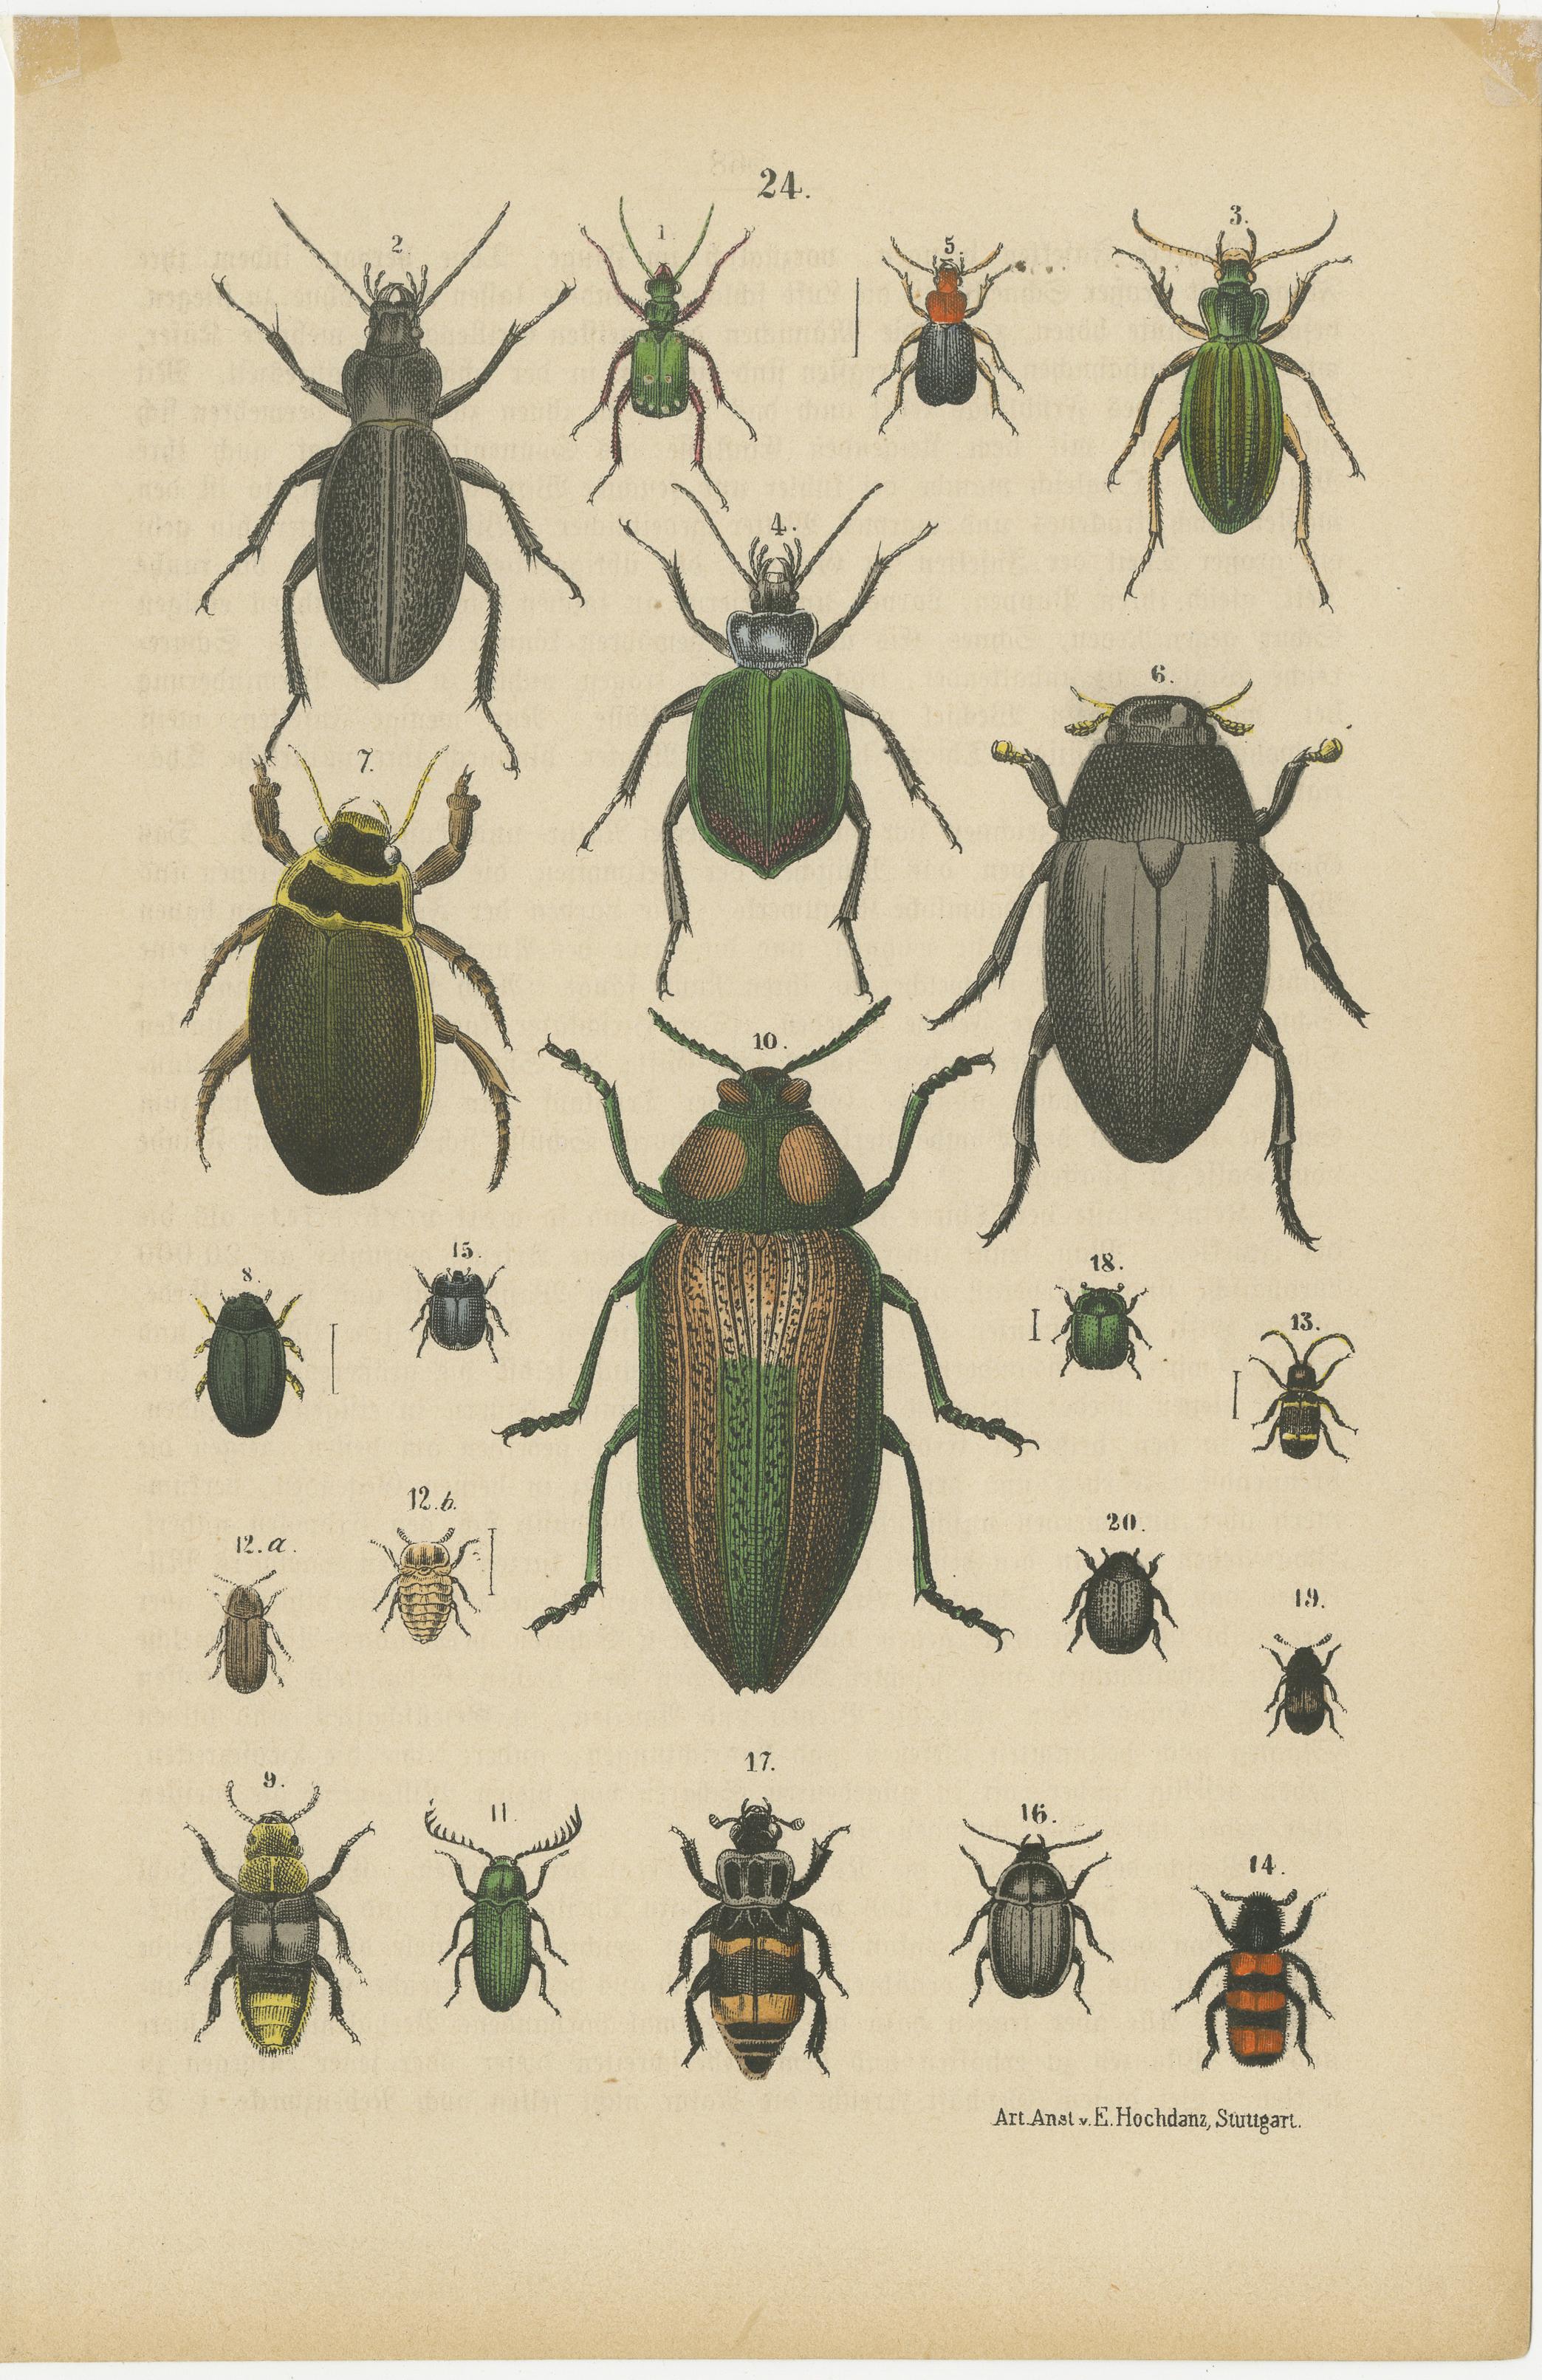 Set of two hand-colored antique prints depicting many beetles. Source unknown, to be determined. Published by E. Hochdanz, circa 1890. The print include a Rhinoceros Beetle. Rhinoceros Beetles are distinguished by their sizeable horn-like structures